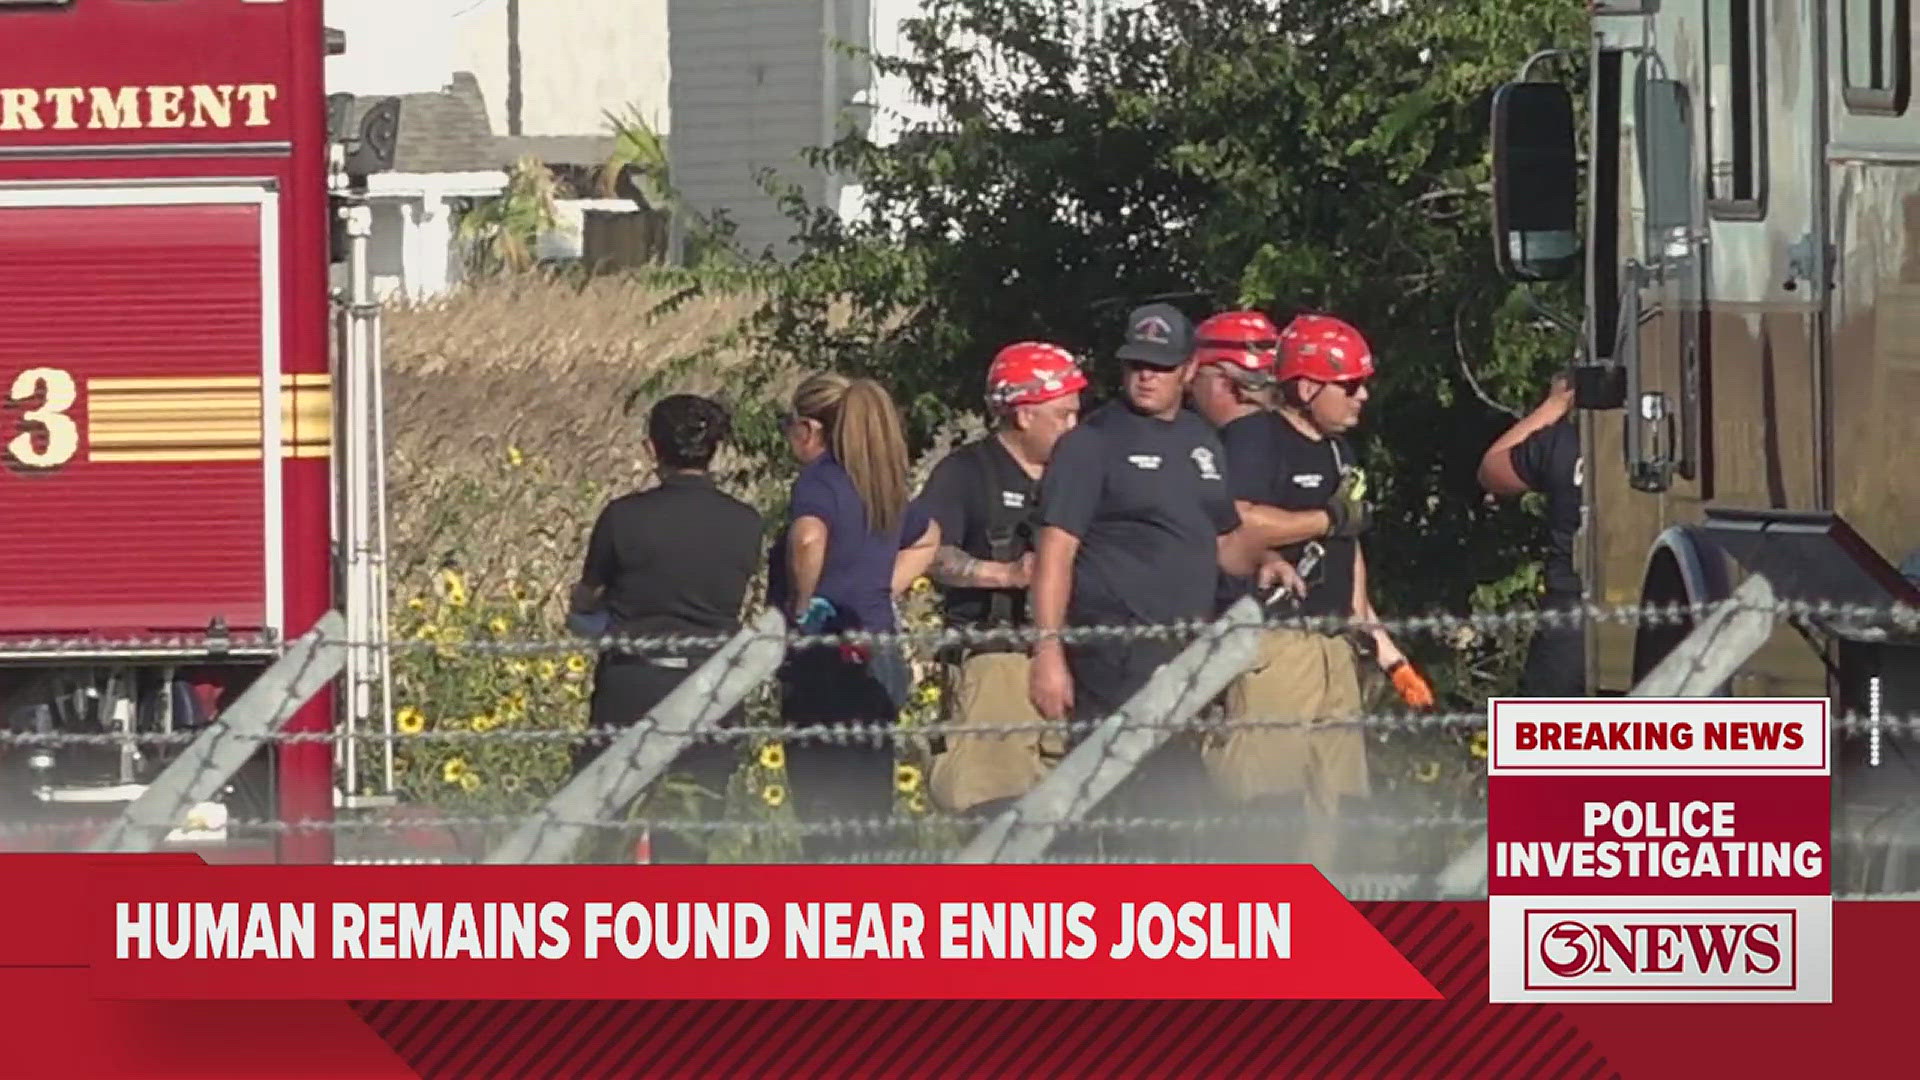 There's no evidence at this time that these human remains are in any way connected to the disappearance of Caleb Harris.